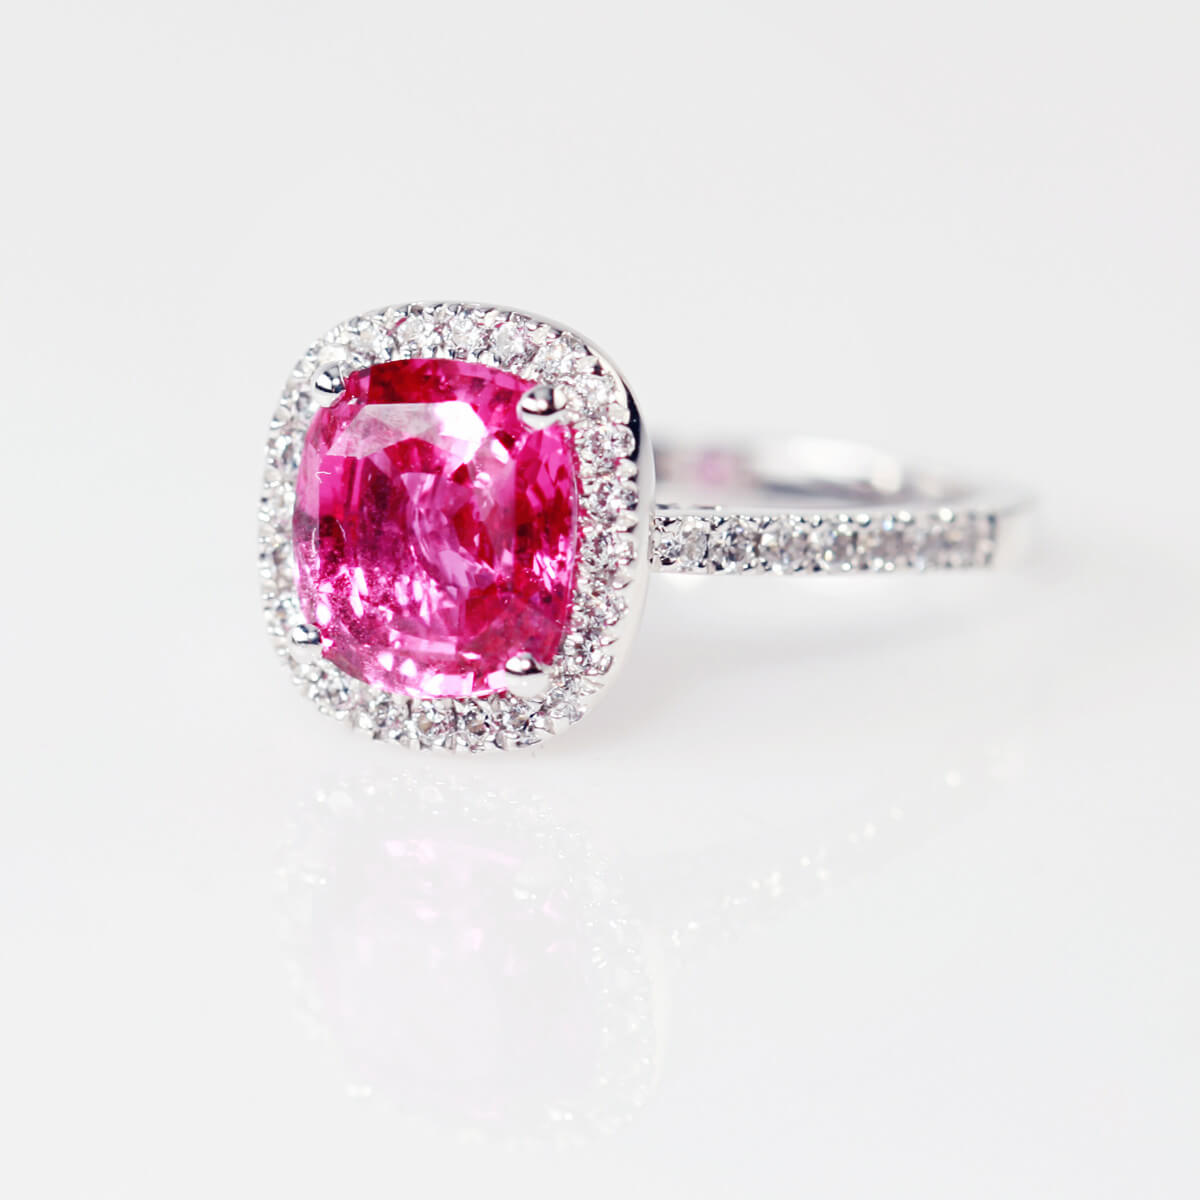 "Commission a stunning cocktail ring, both elegant and timeless”